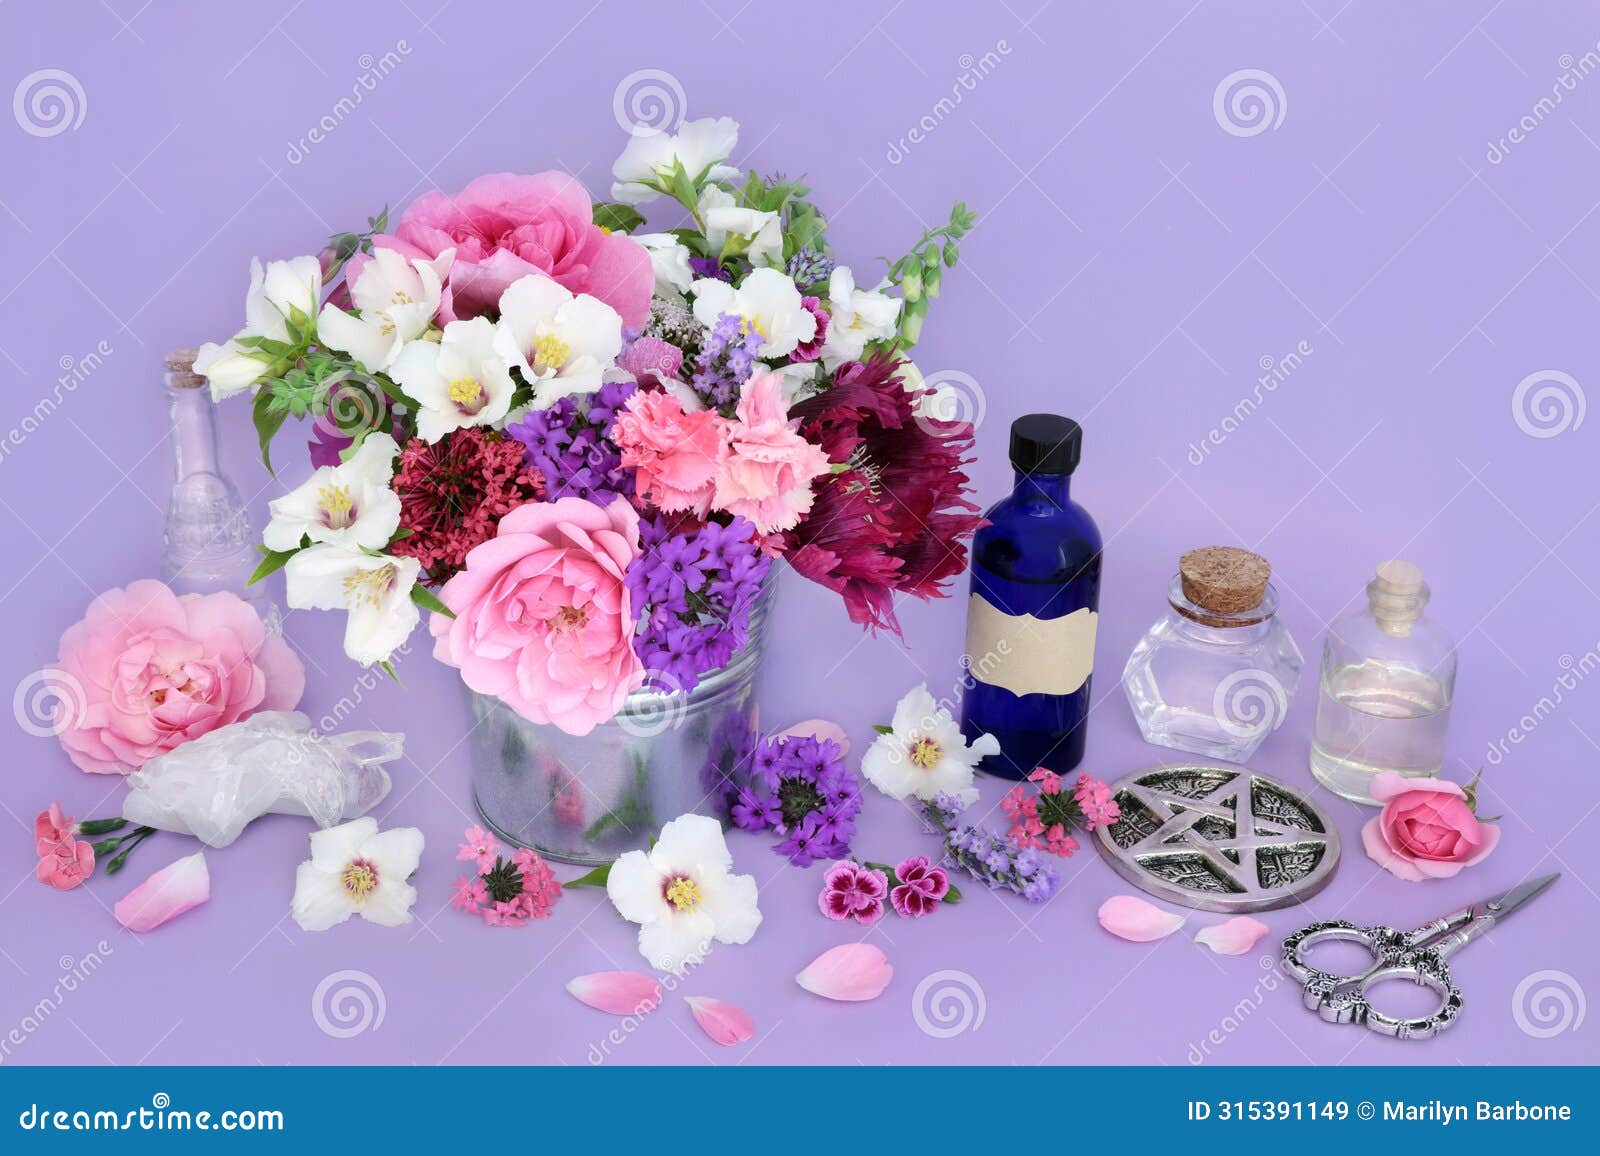 preparation of flowers and herbs for herbal remedies